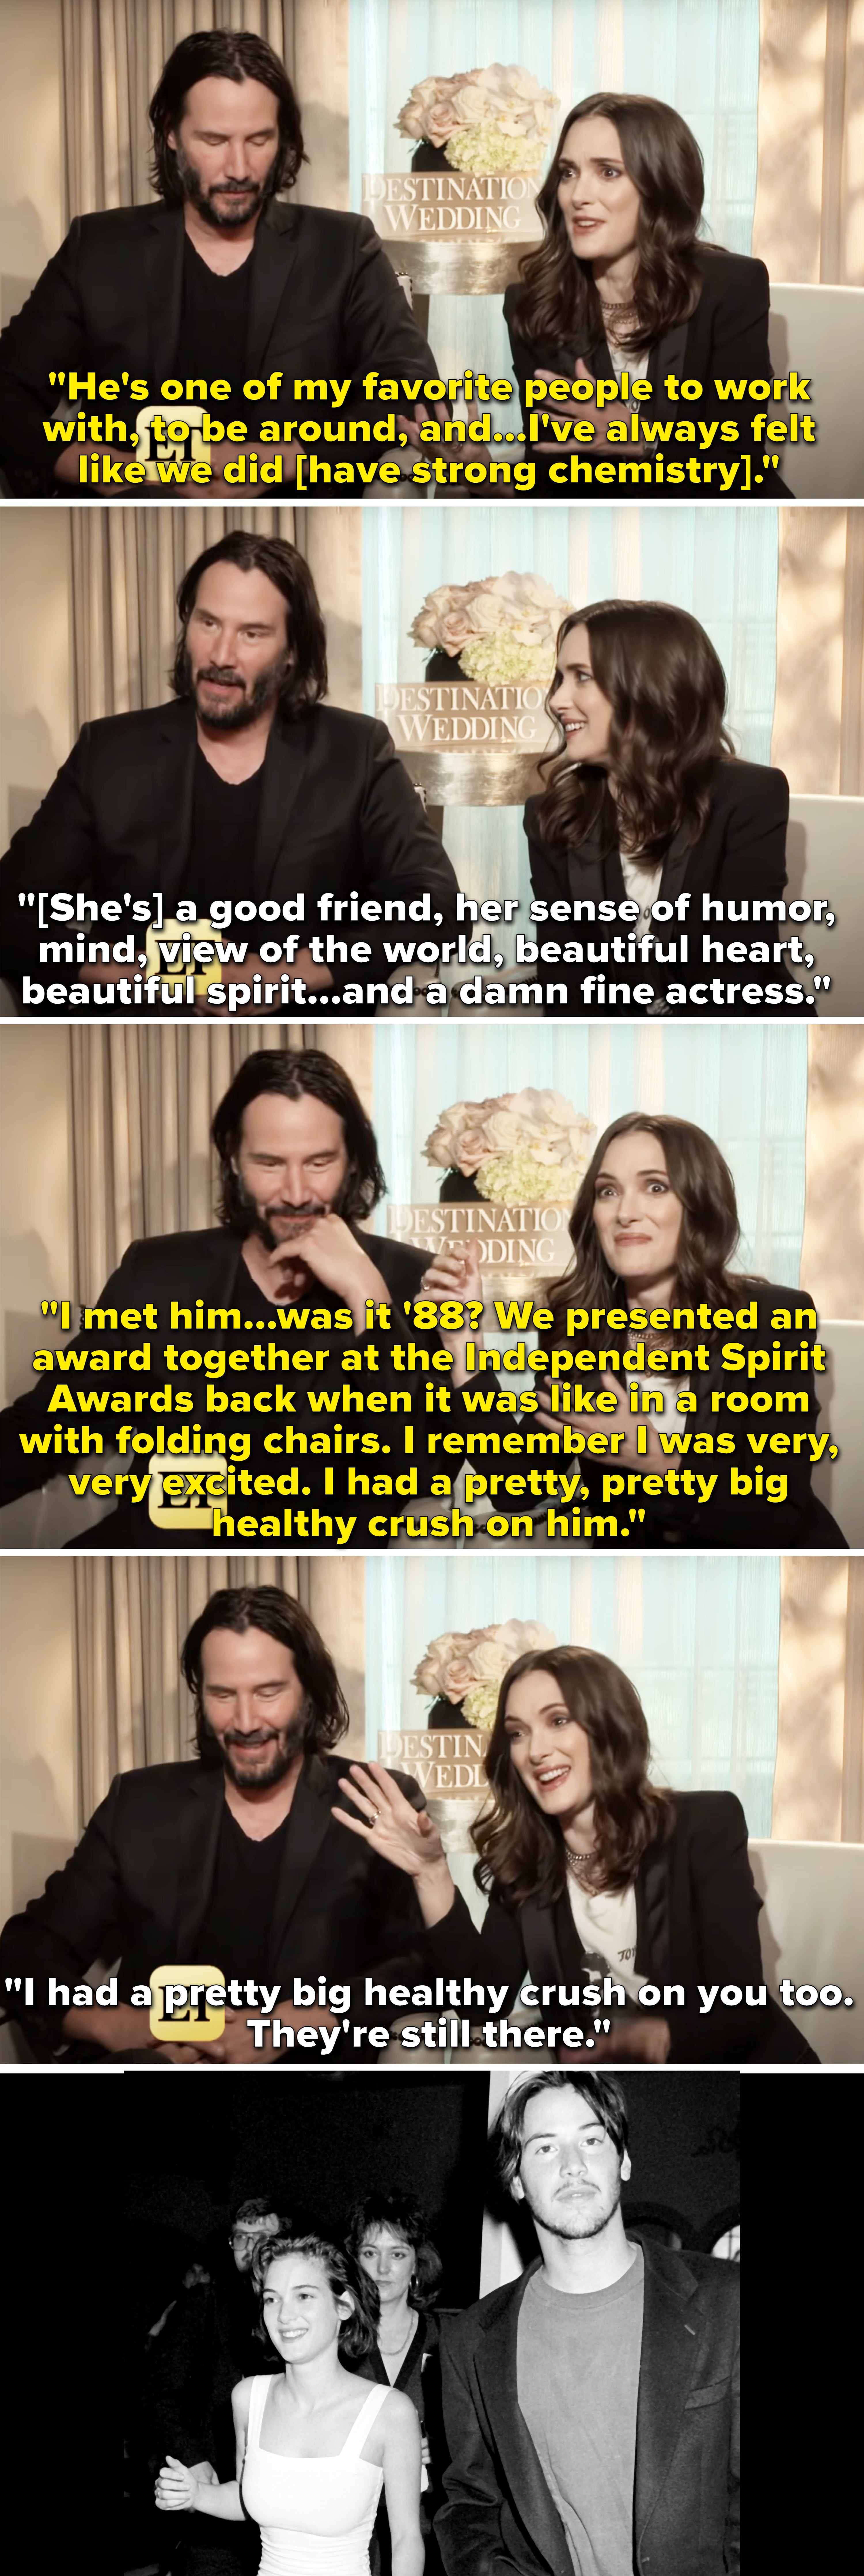 Winona Ryder and Keanu Reeves being interviewed and admitted they had and still have crushes on each other